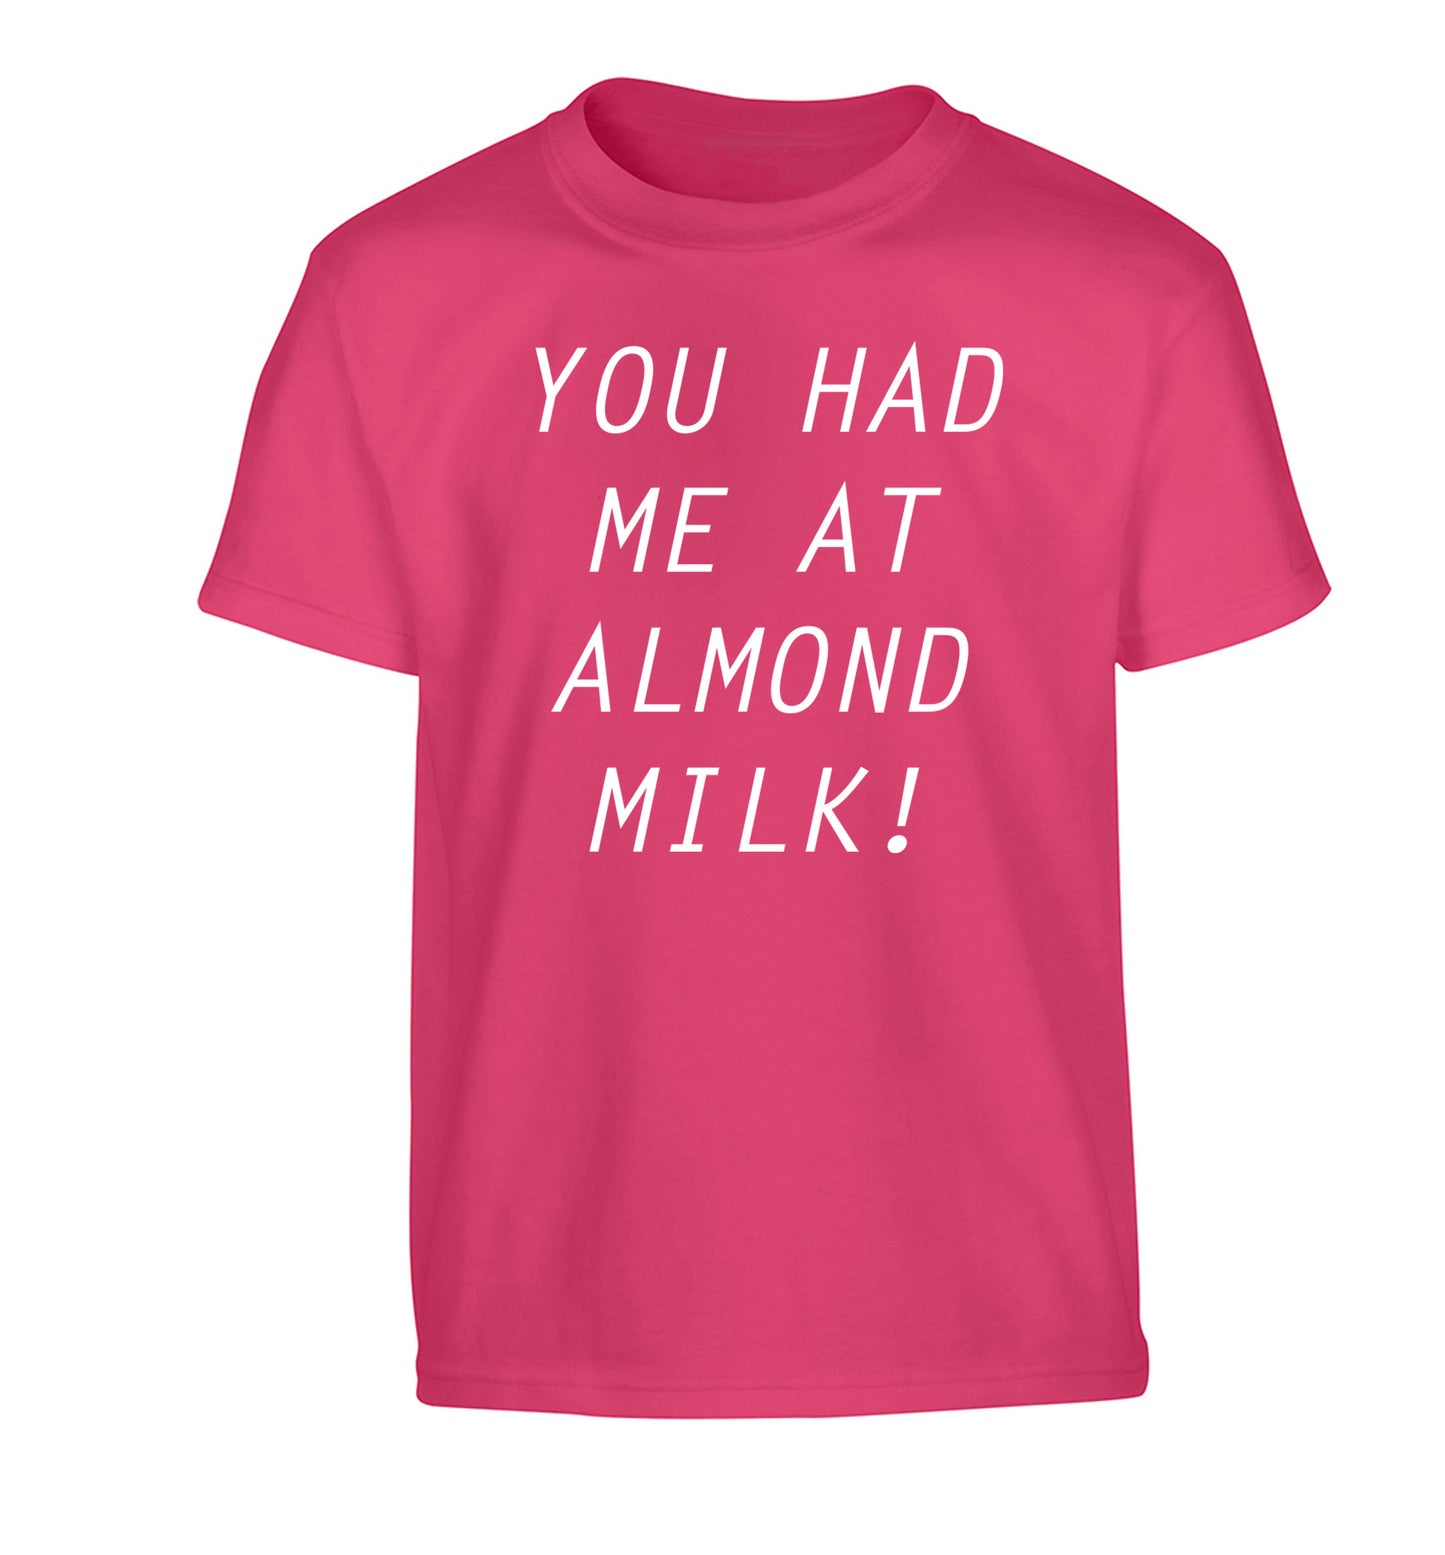 You had me at almond milk Children's pink Tshirt 12-14 Years